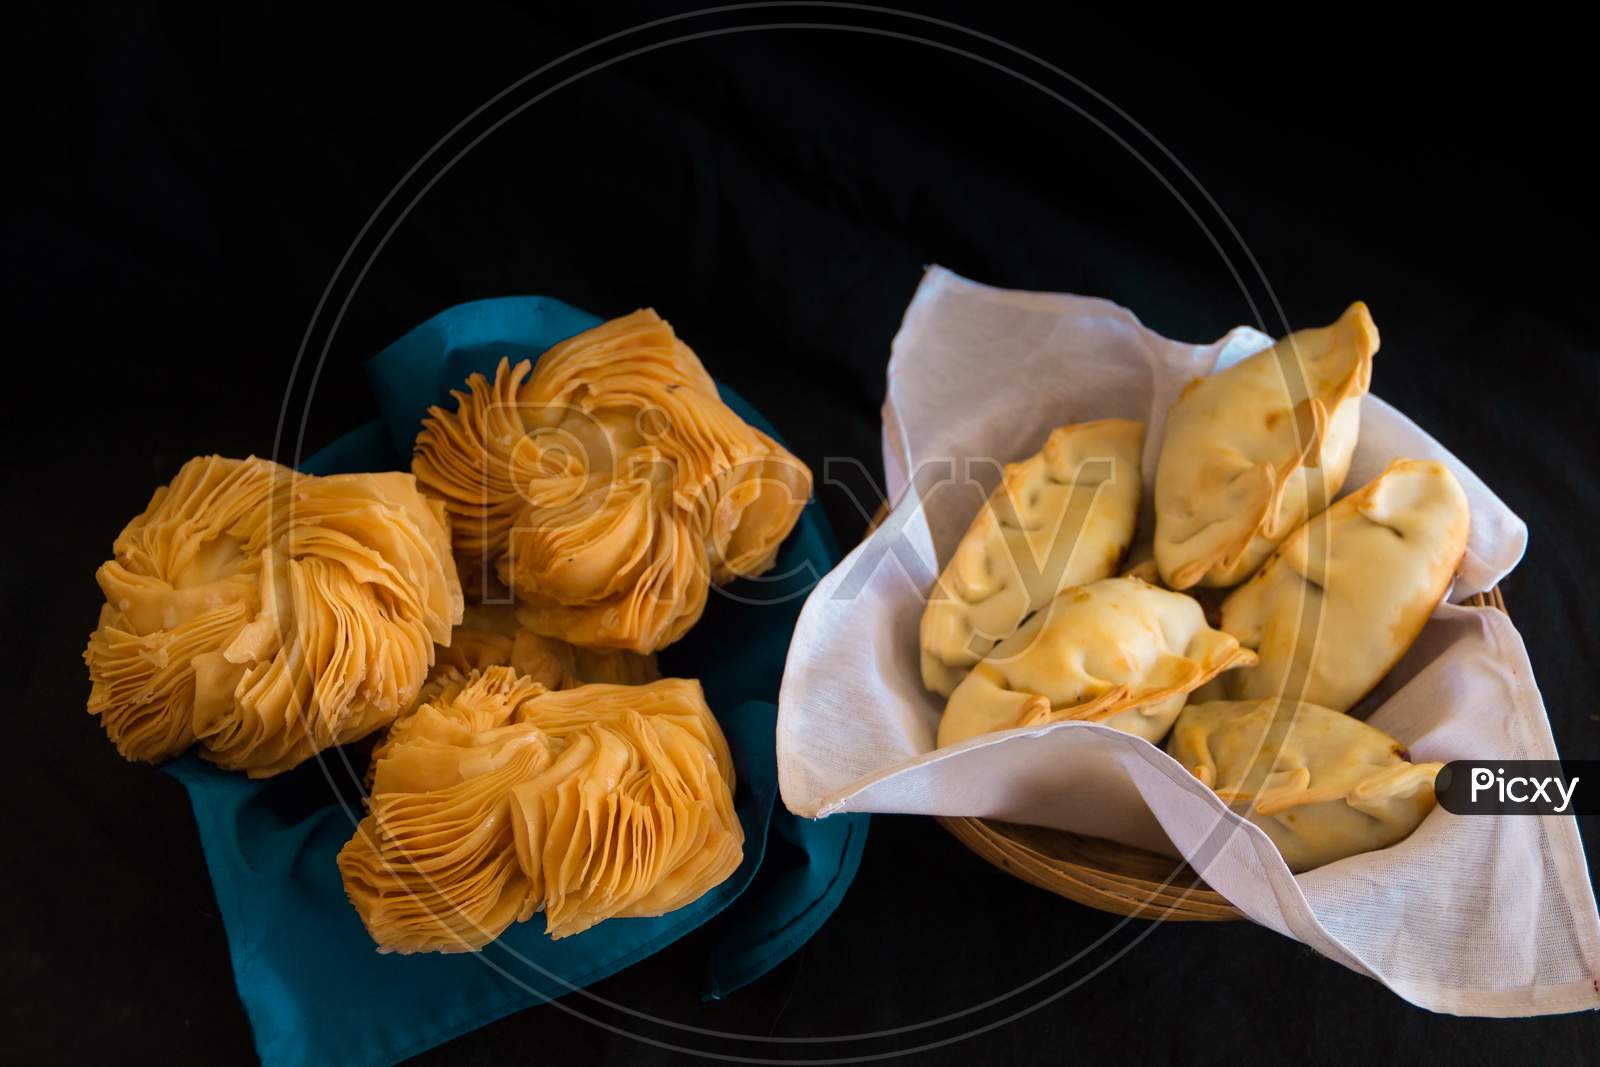 Dishes Of Locro Empanadas And Sweet Pastries, Traditional Argentine Foods That Are Frequently Consumed For National Holidays, Such As The Revolution Of May 25 And Independence On July 9